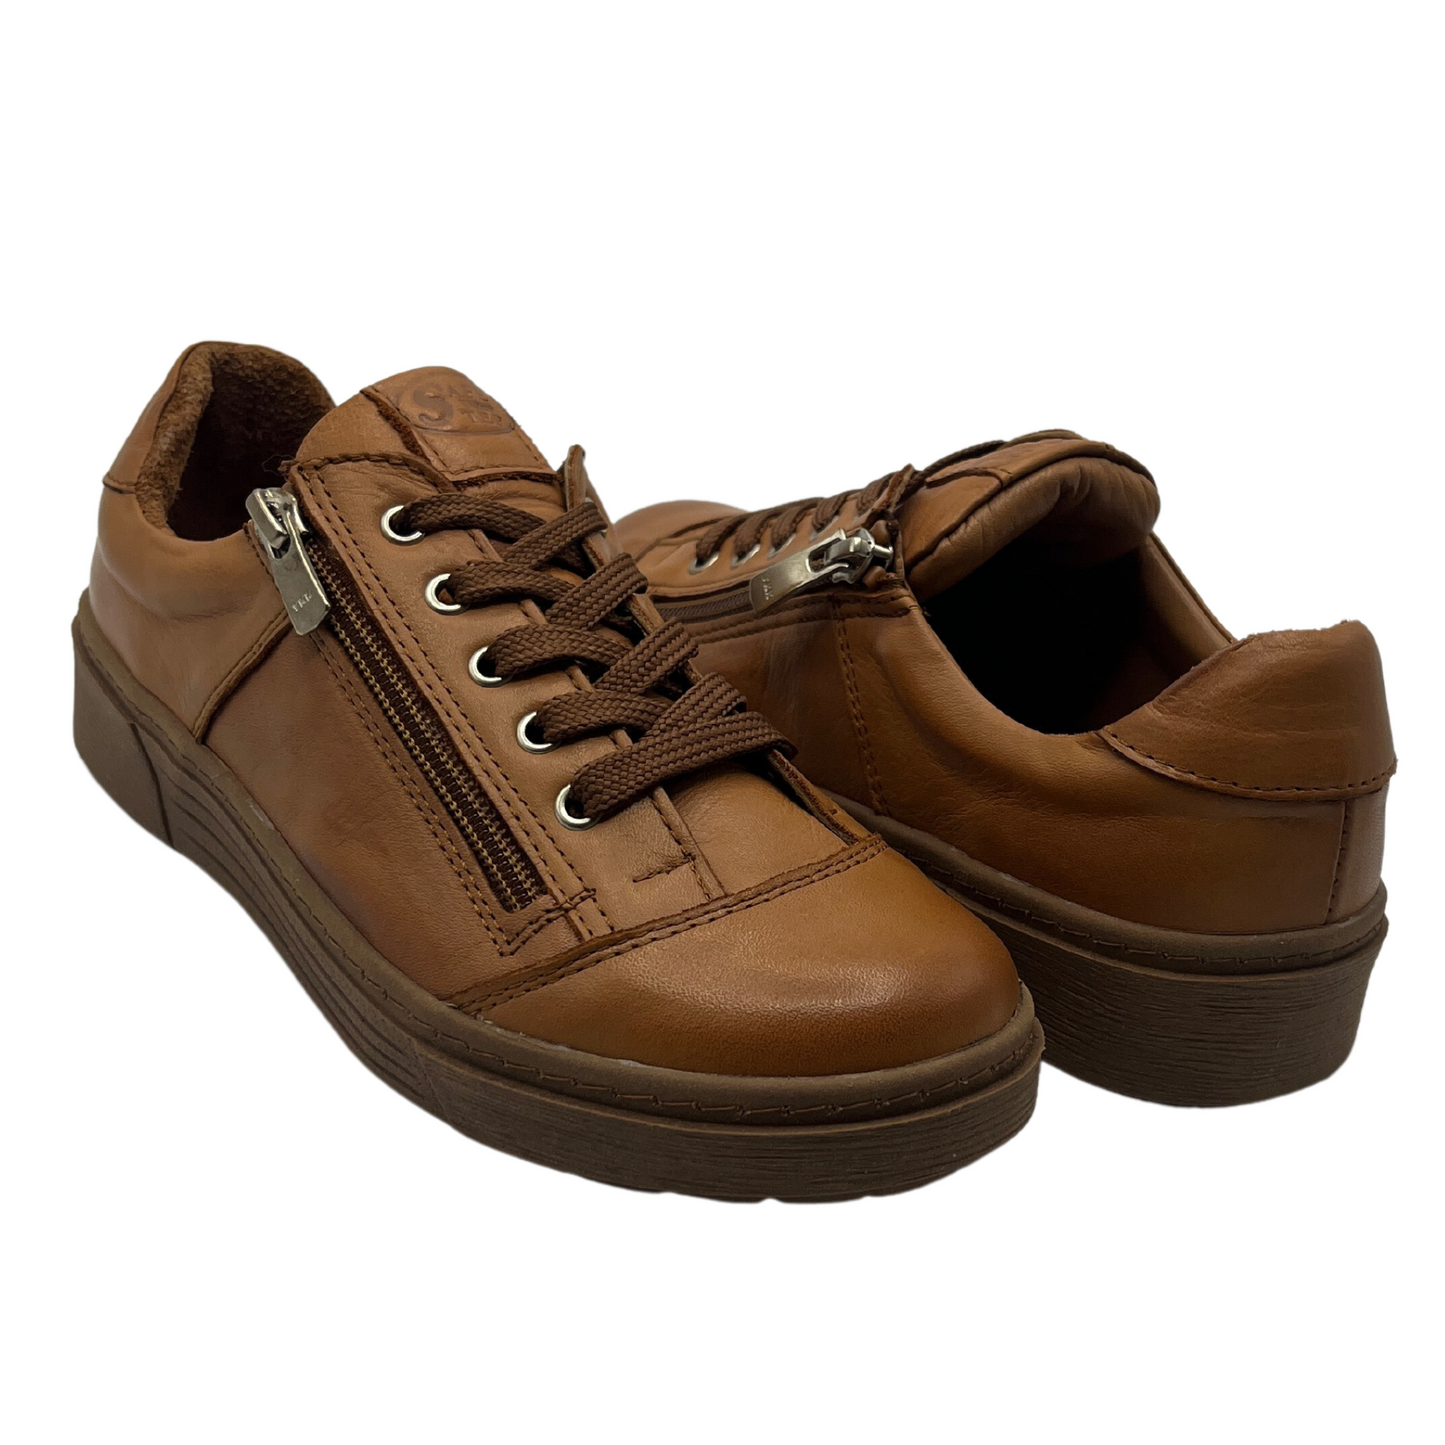 View of a pair of brown leather sneakers with side zipper closures and matching laces